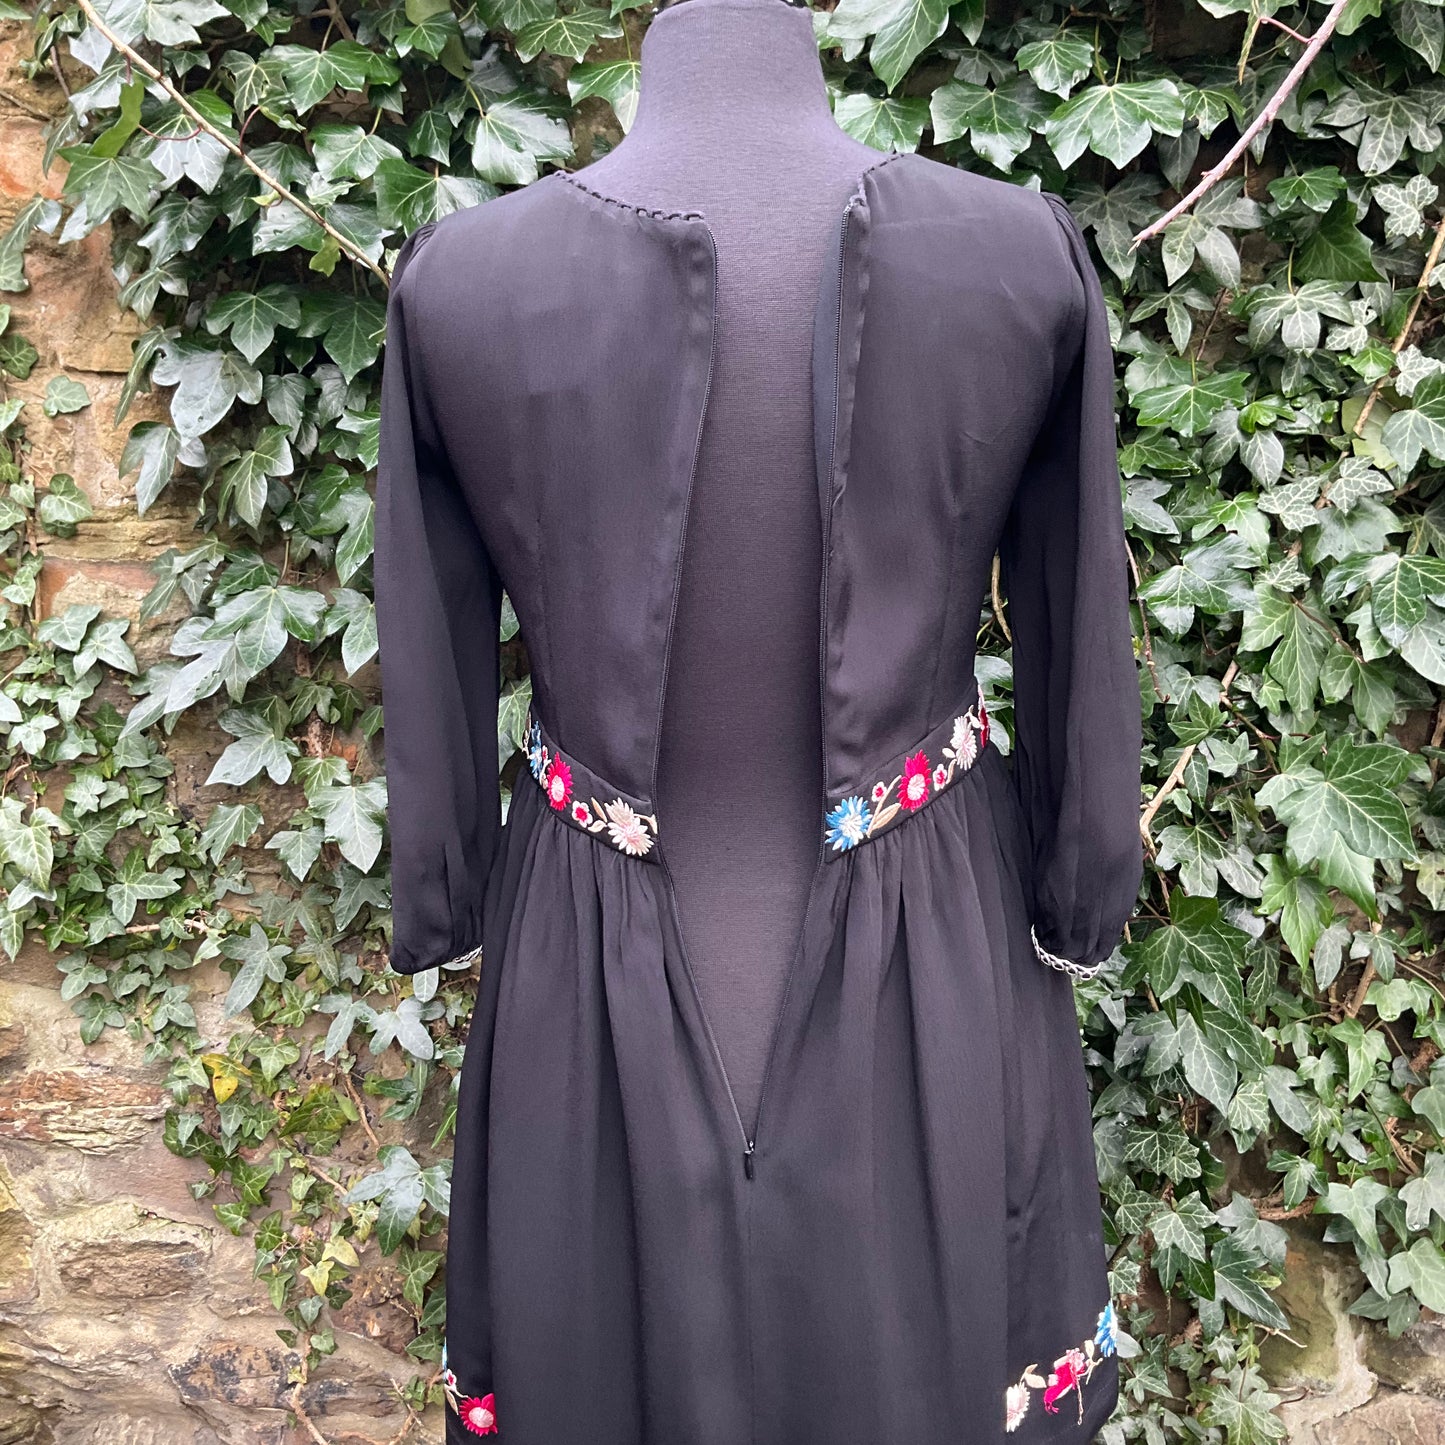 Vintage French Connection Bohemian floral Embroidered Rayon dress, size 10, wedding, summer holiday.